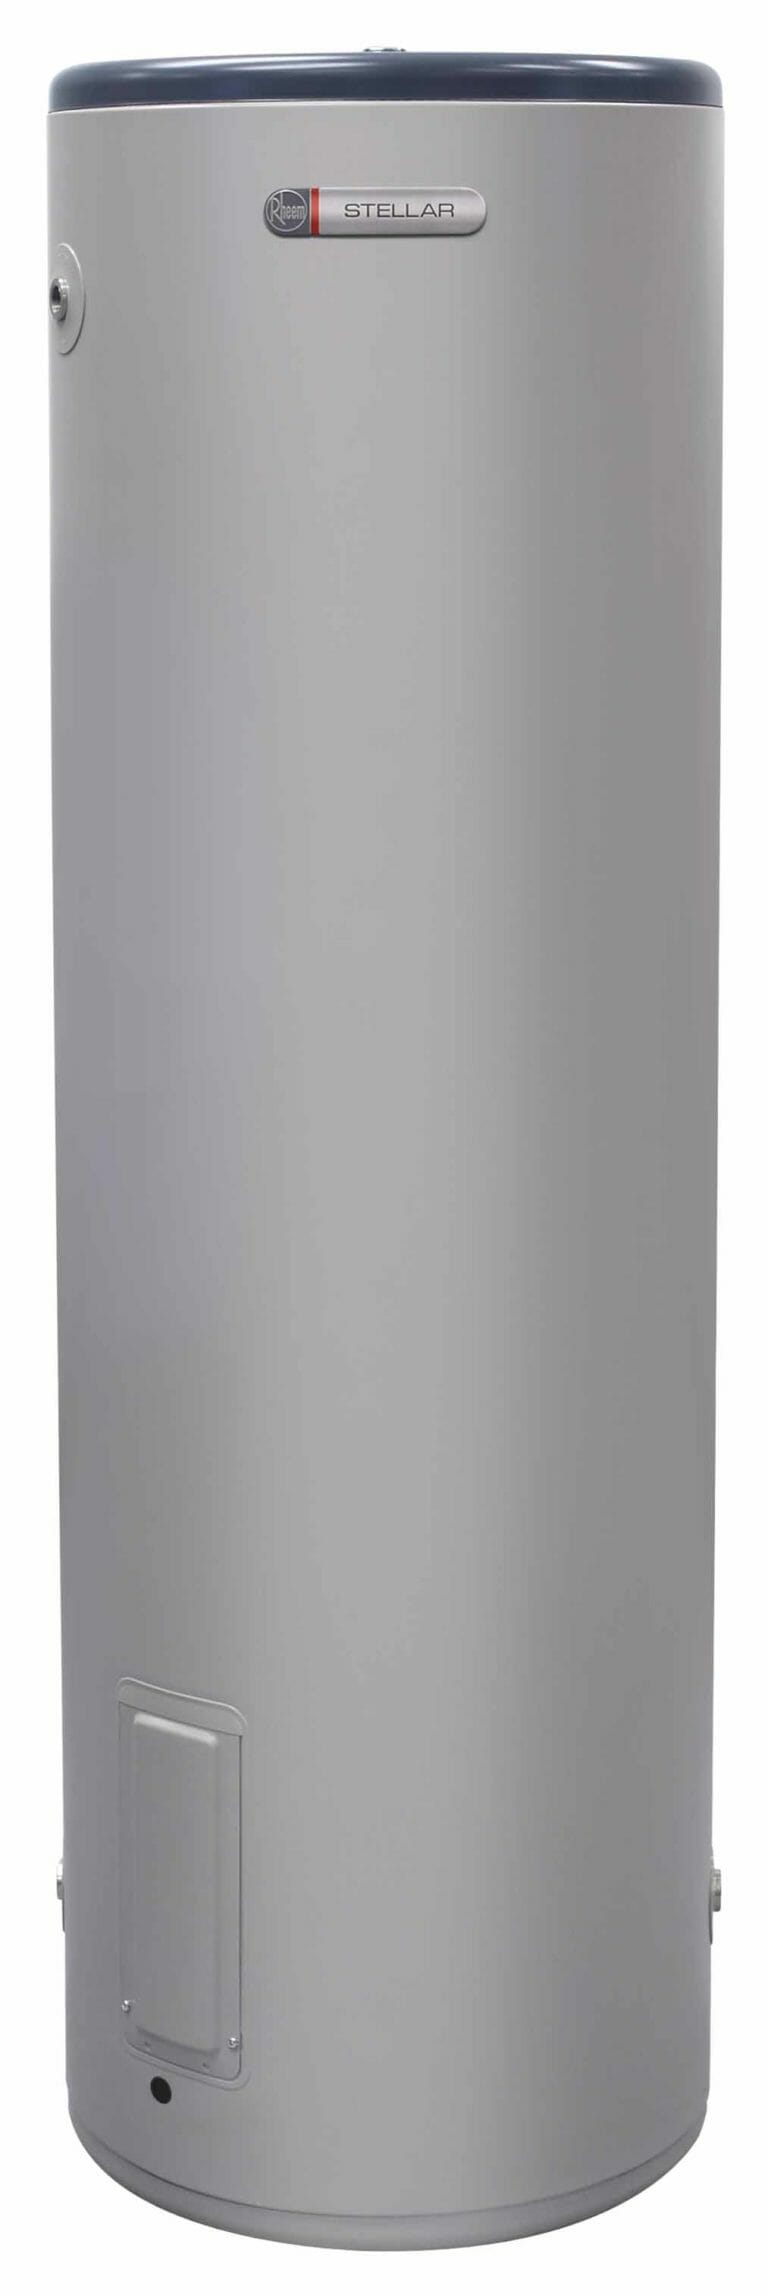 Buy Rheem 250l Electric Hot Water Heater Same Day Hot Water 